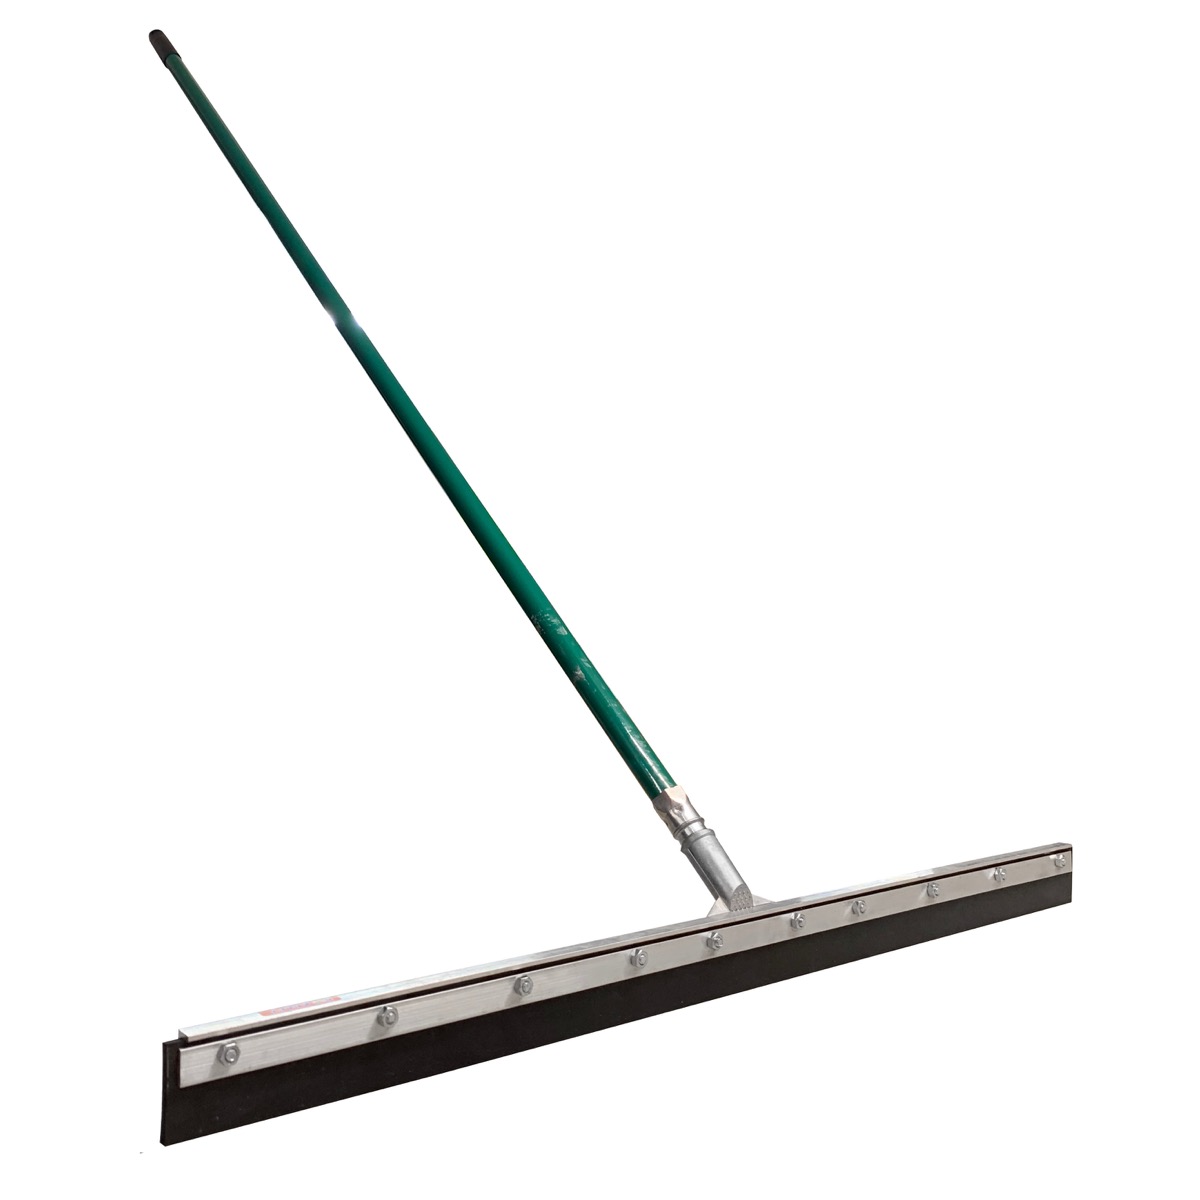 Rubber Squeegee 3ft wide with a 5ft handle.